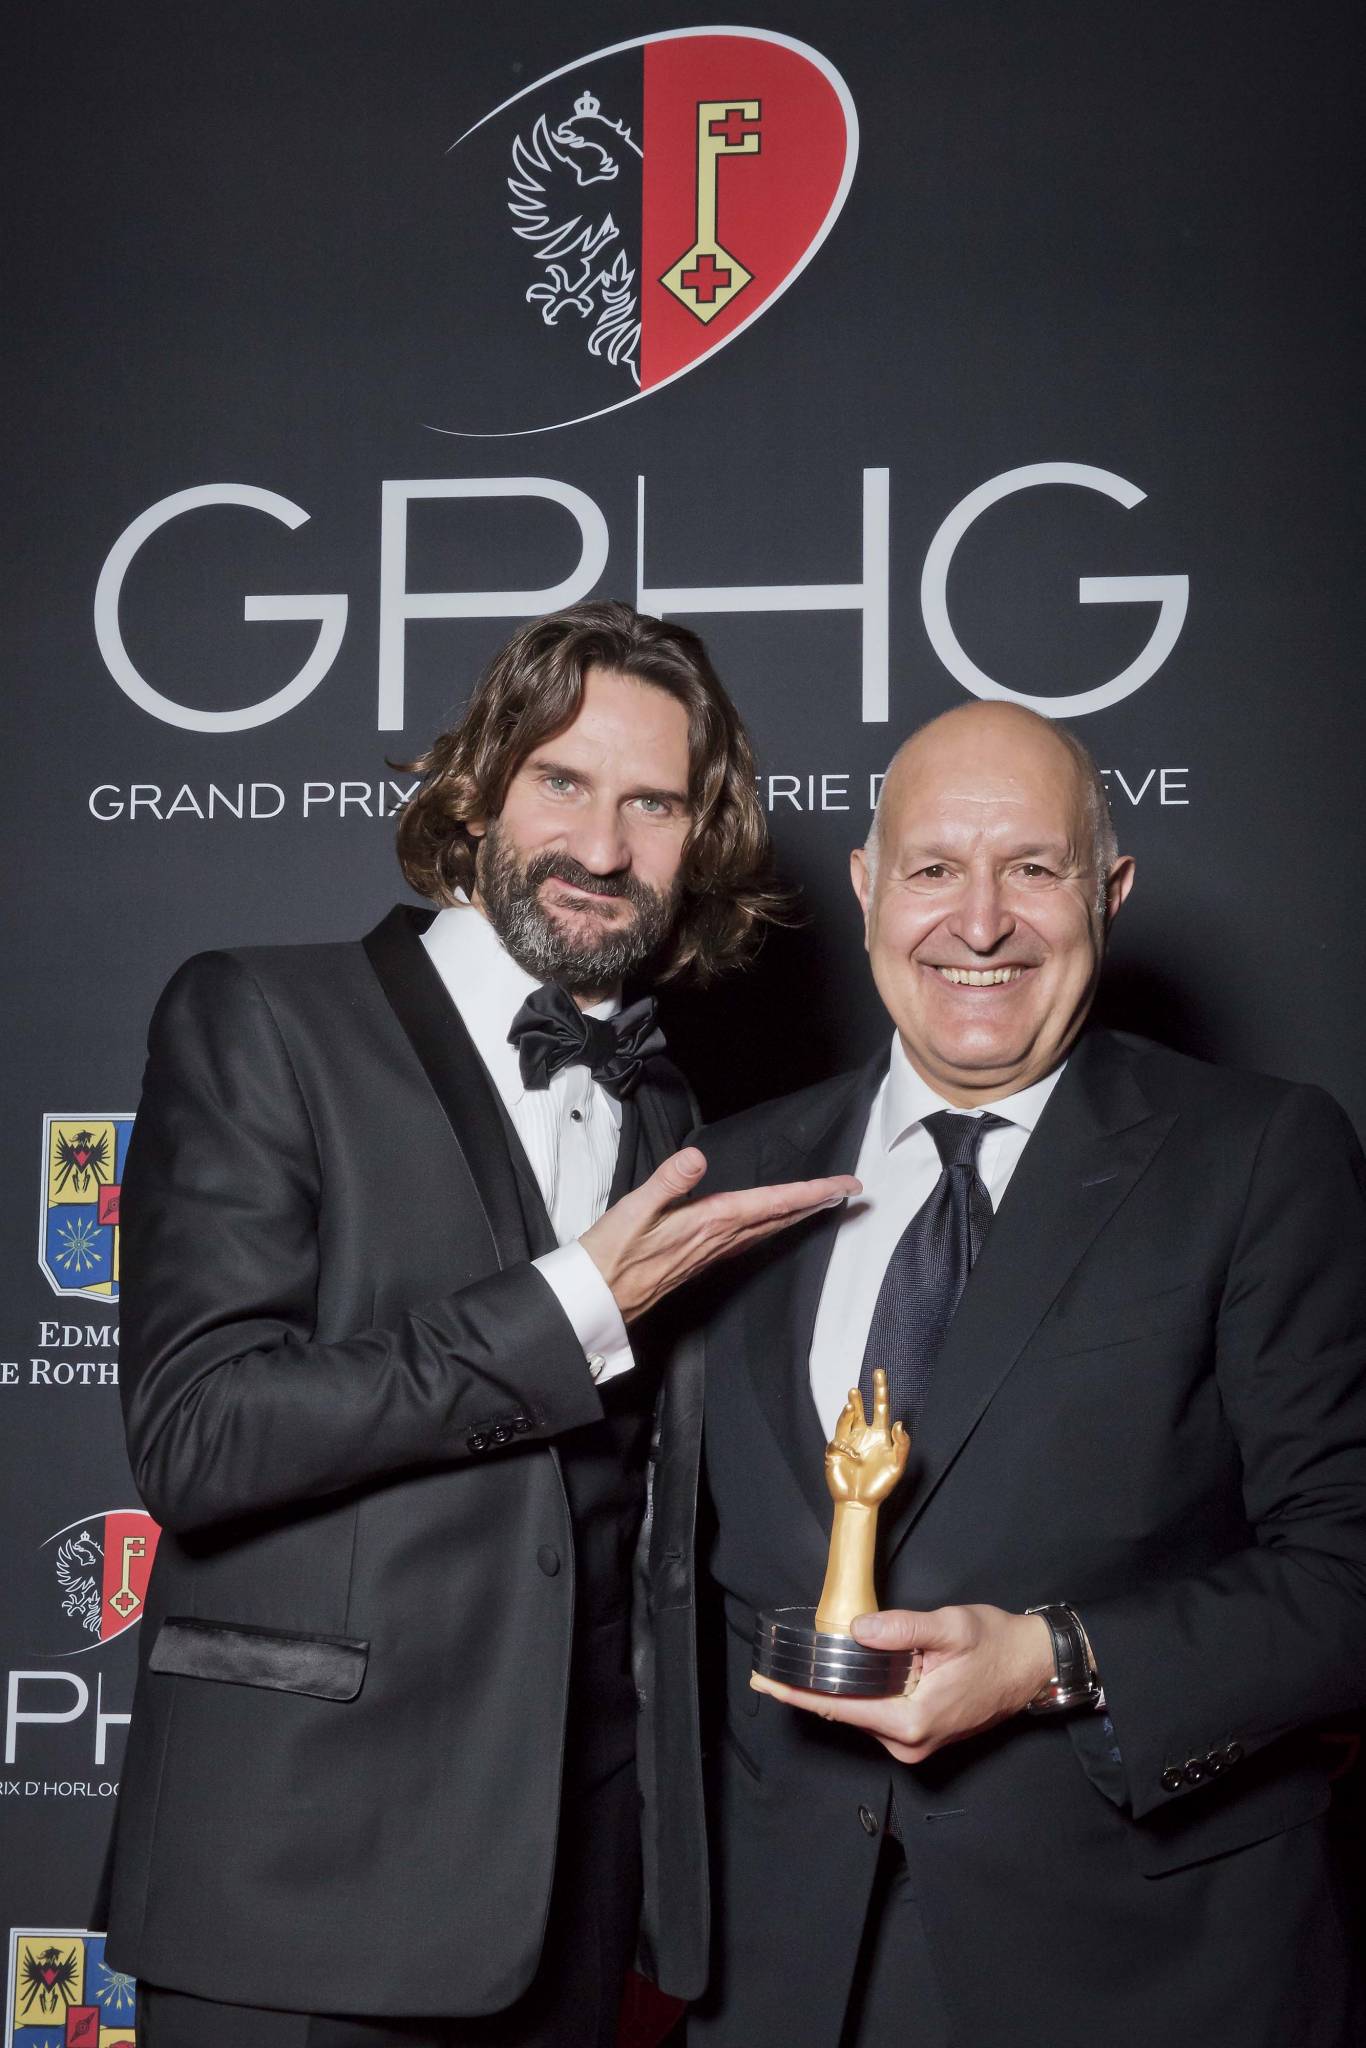 Frédéric Beigbeder and Michele Sofisti, CEO of Girard-Perregaux, winner of the « Aiguille d’Or » Grand Prix 2013